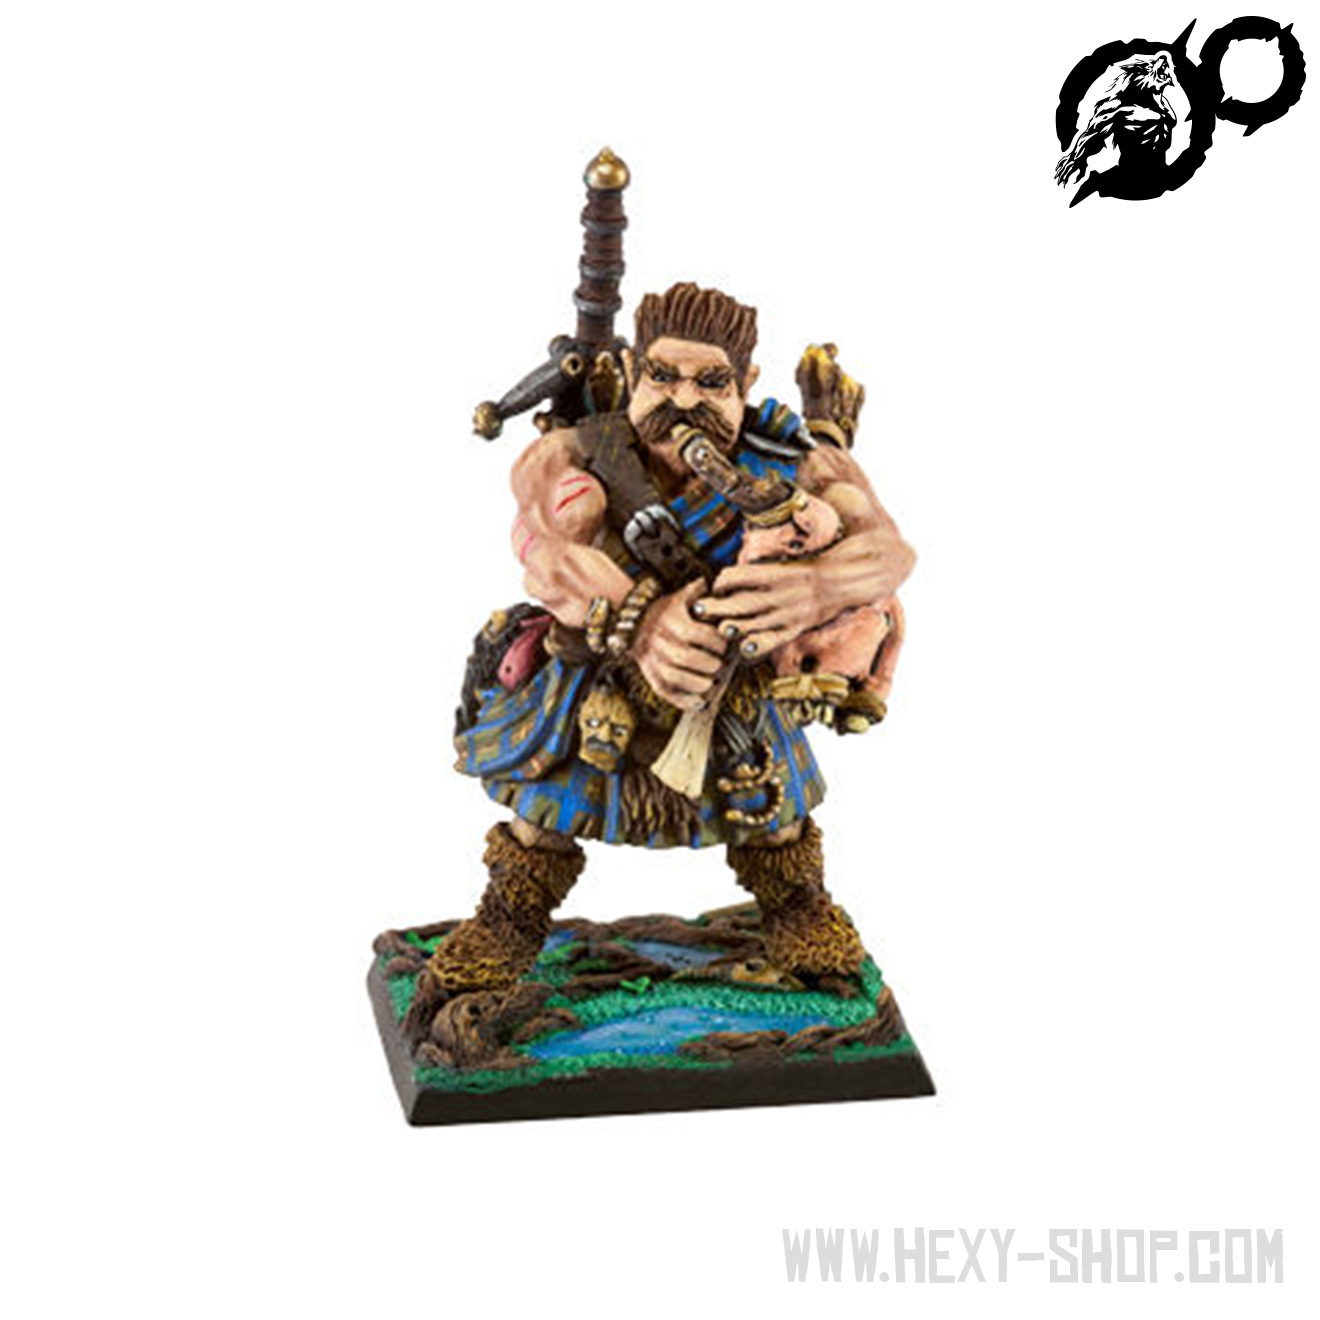 New Ogre Mercenary miniature from Werewoolf Miniatures available in Hexy-Shop!